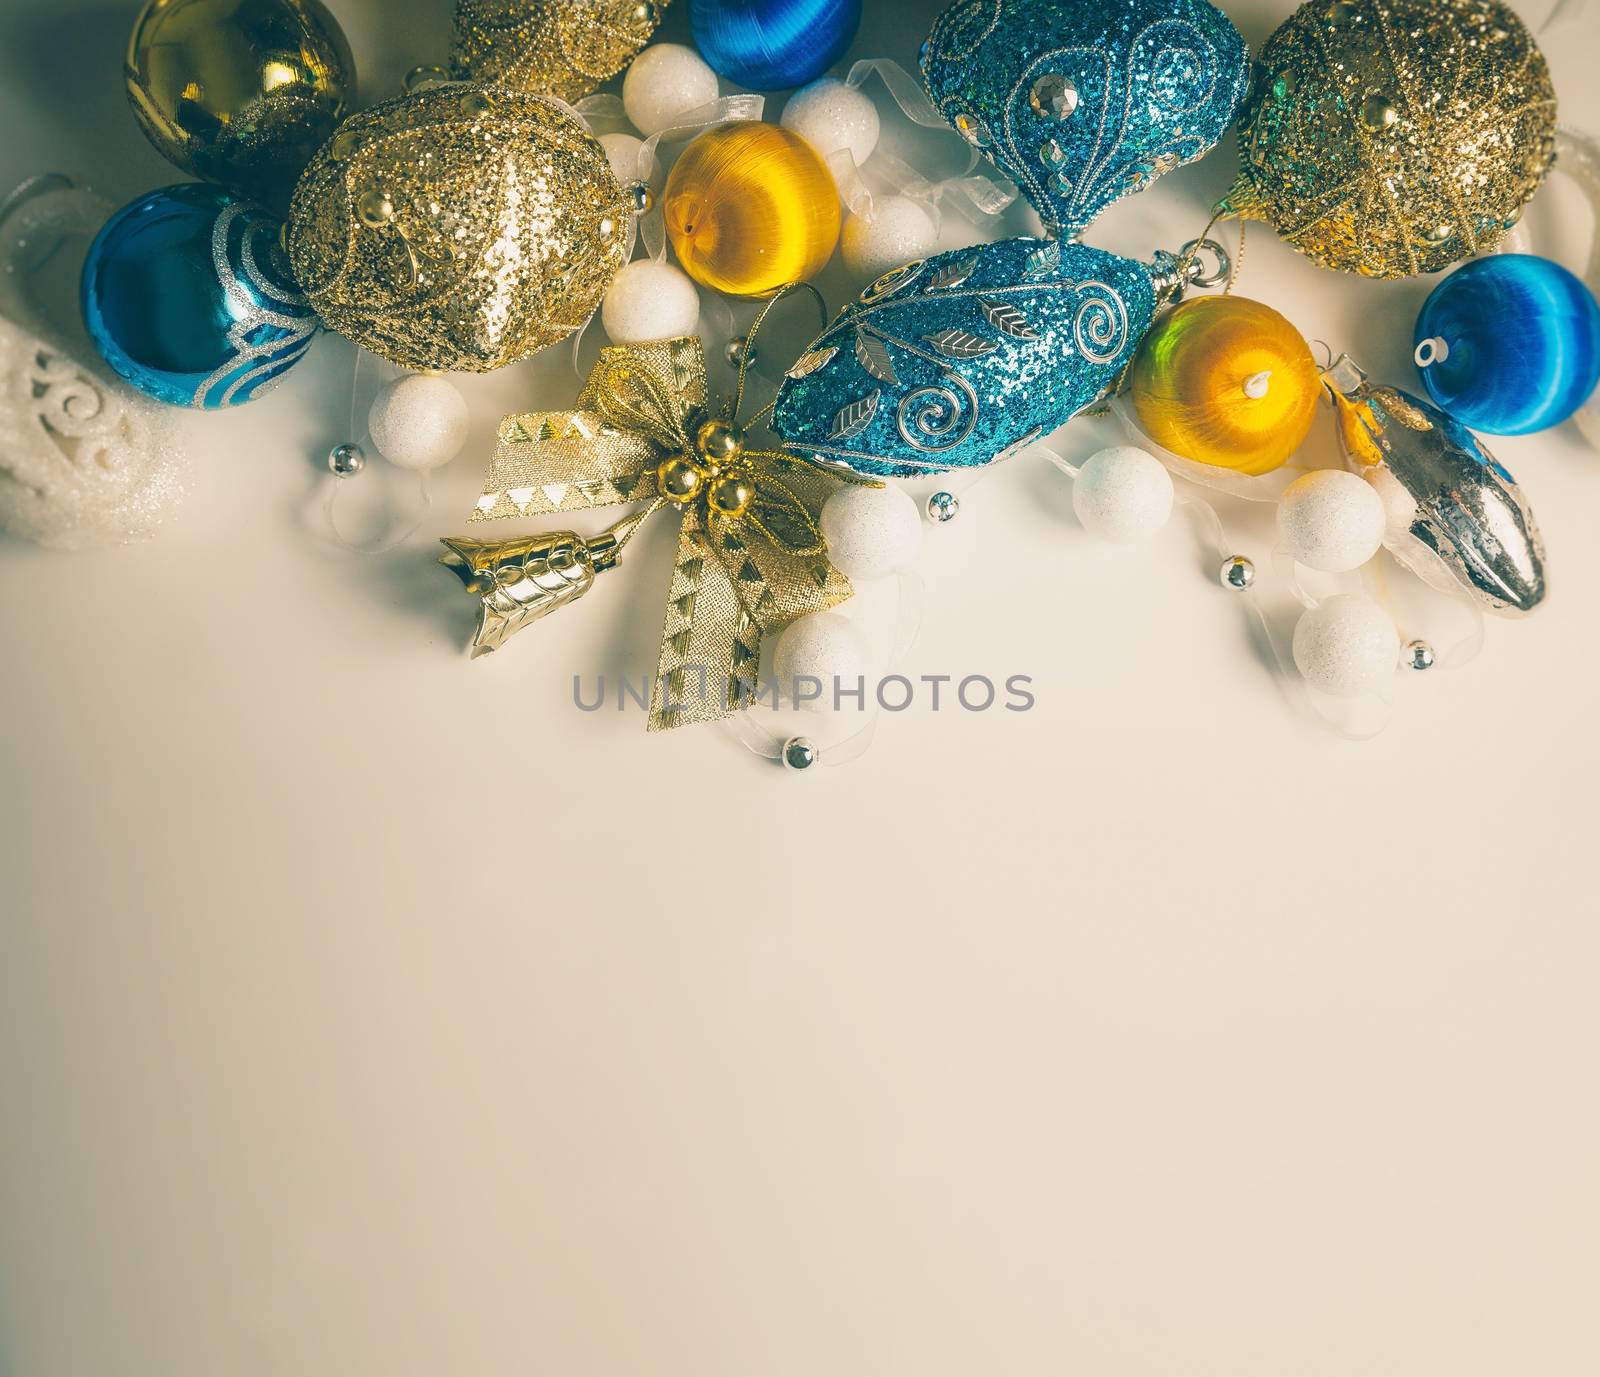 Christmas 2019 with blue and golden decor by mi_viri